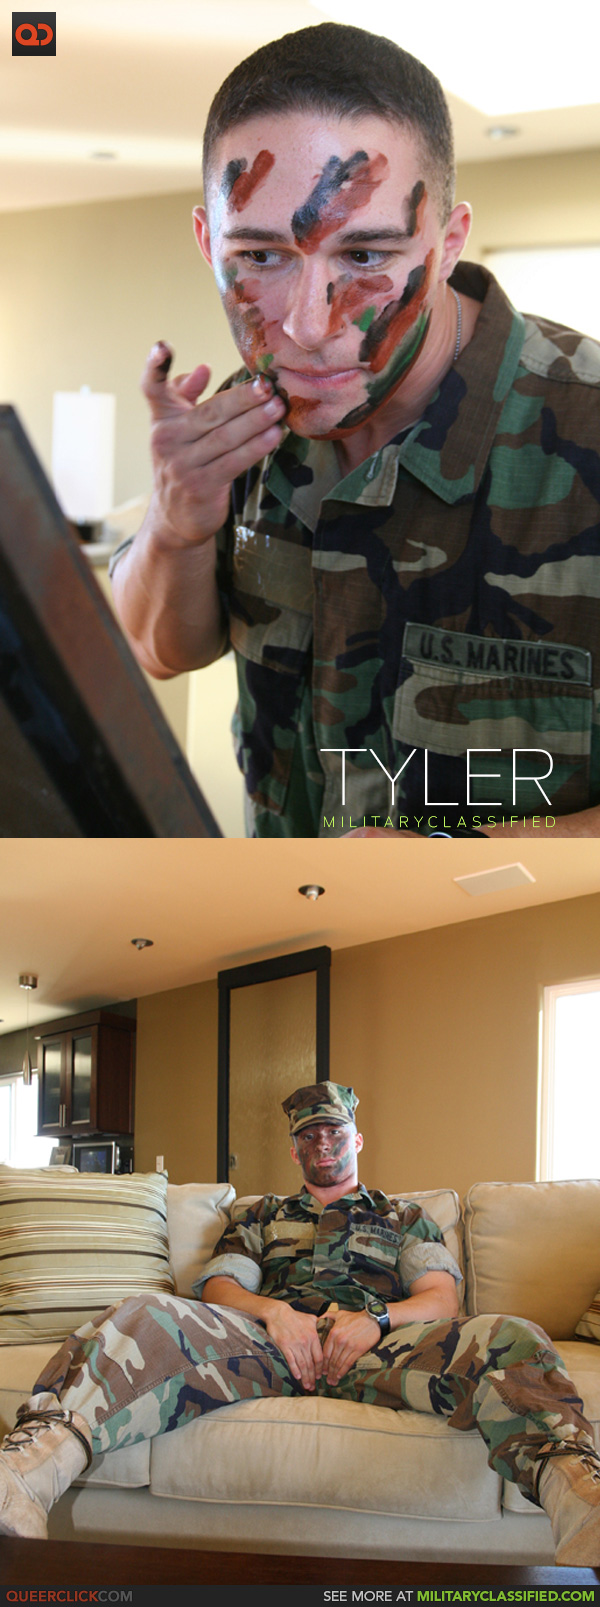 Military Classified: Tyler